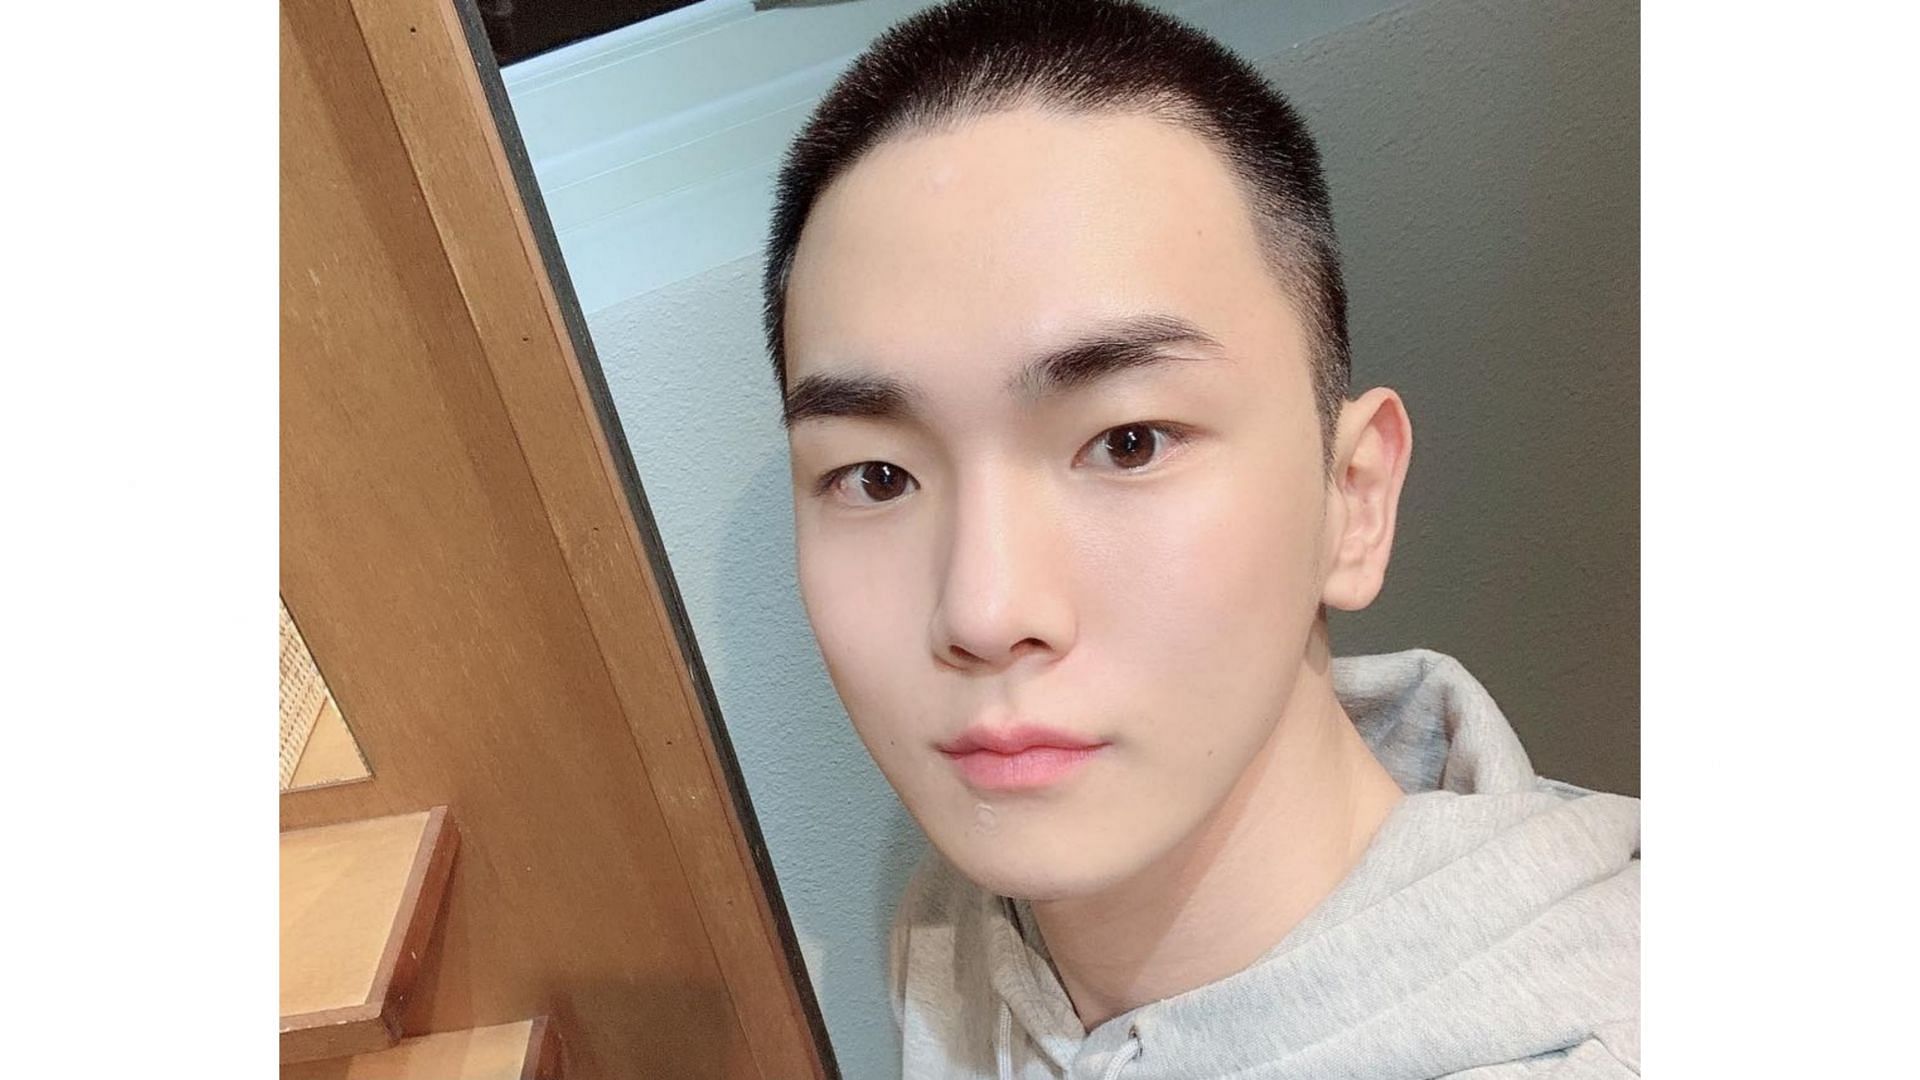 Kim Ki-bum aka Key shared his buzzcut image before his enlistment on March 4, 2019 and was discharged during COVID on October 7, 2020. (Image via Instagram/@bumkeyk)